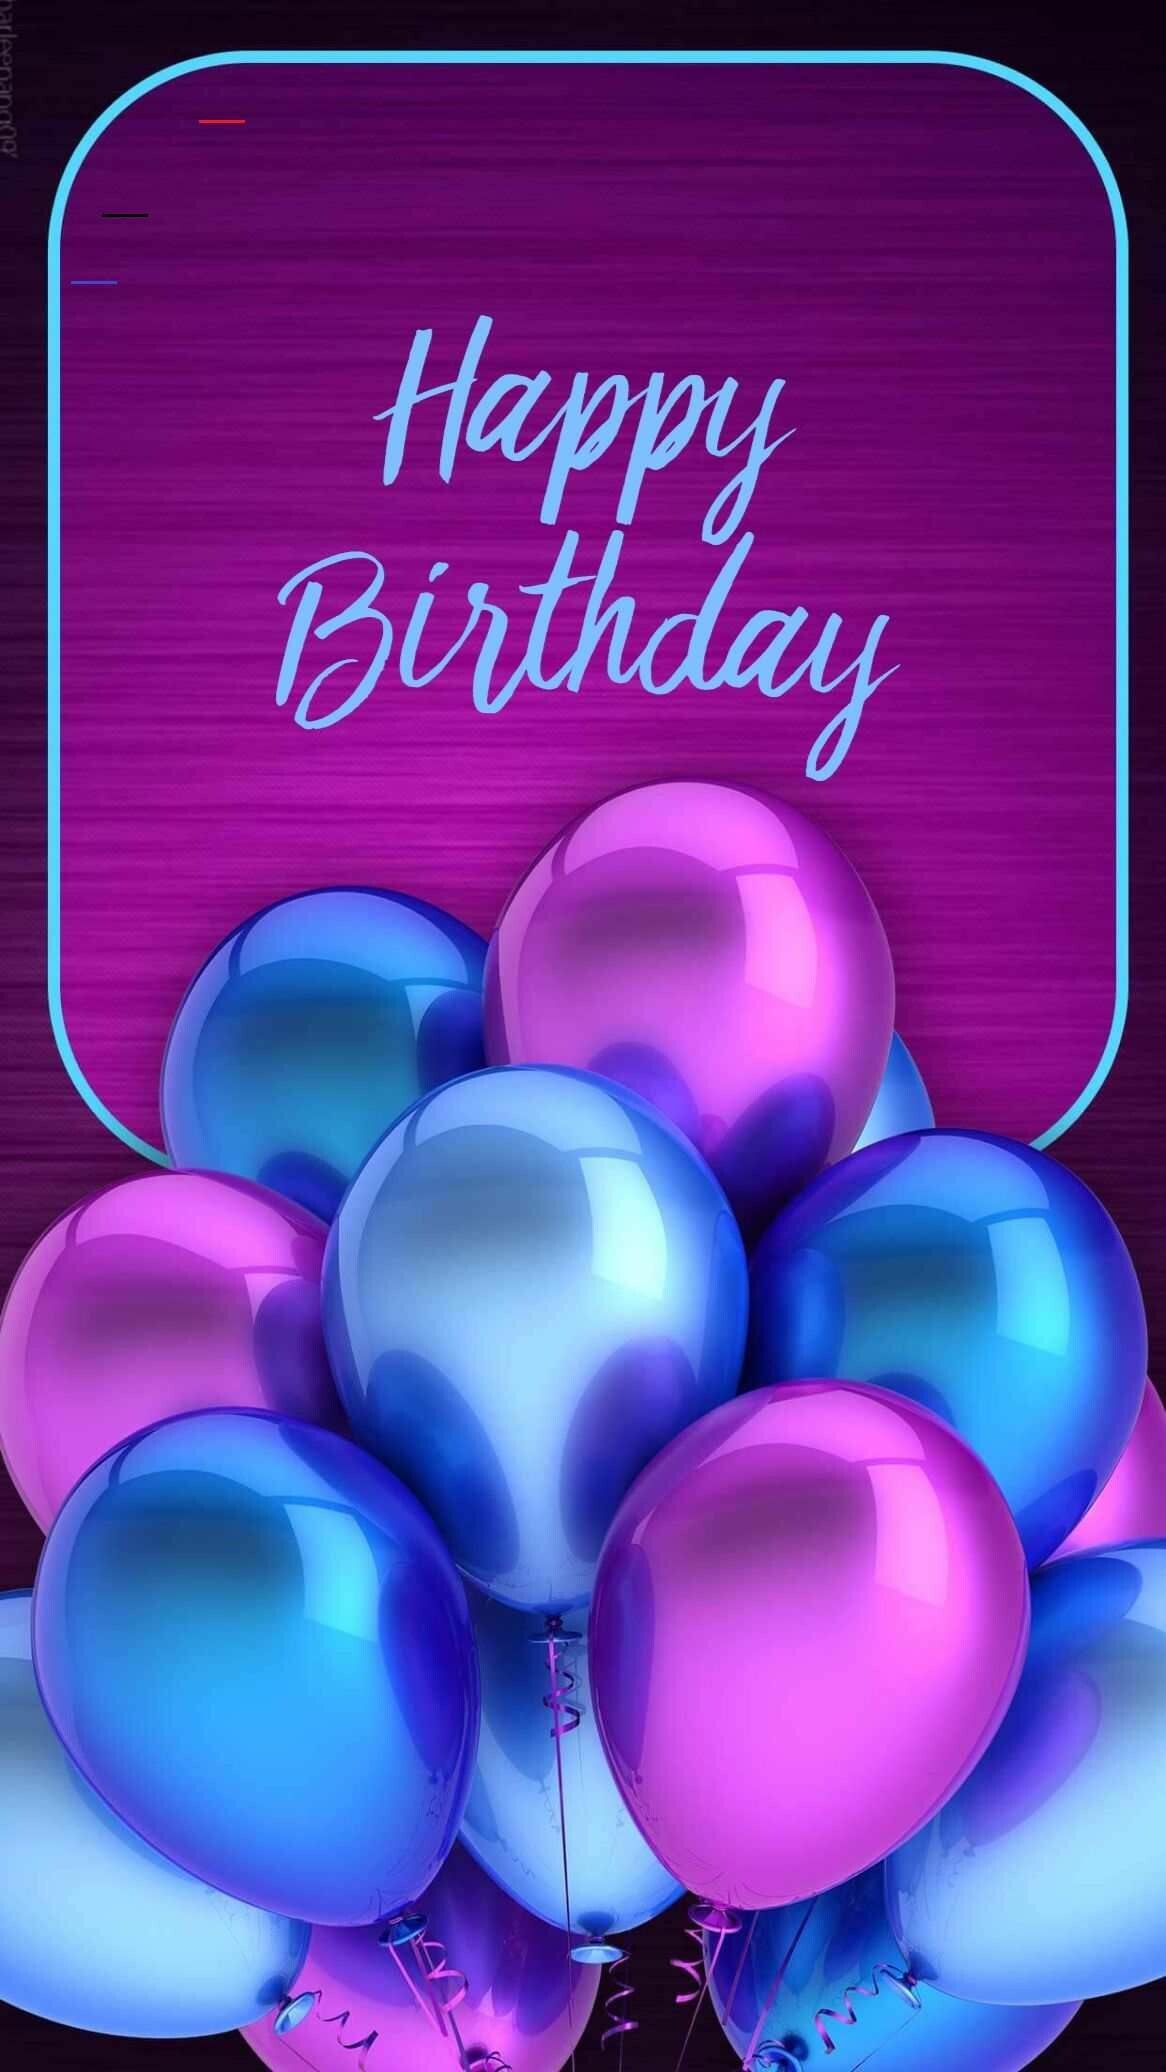 Birthday Party: Anniversary, Greetings, Decor. 1170x2080 HD Background.